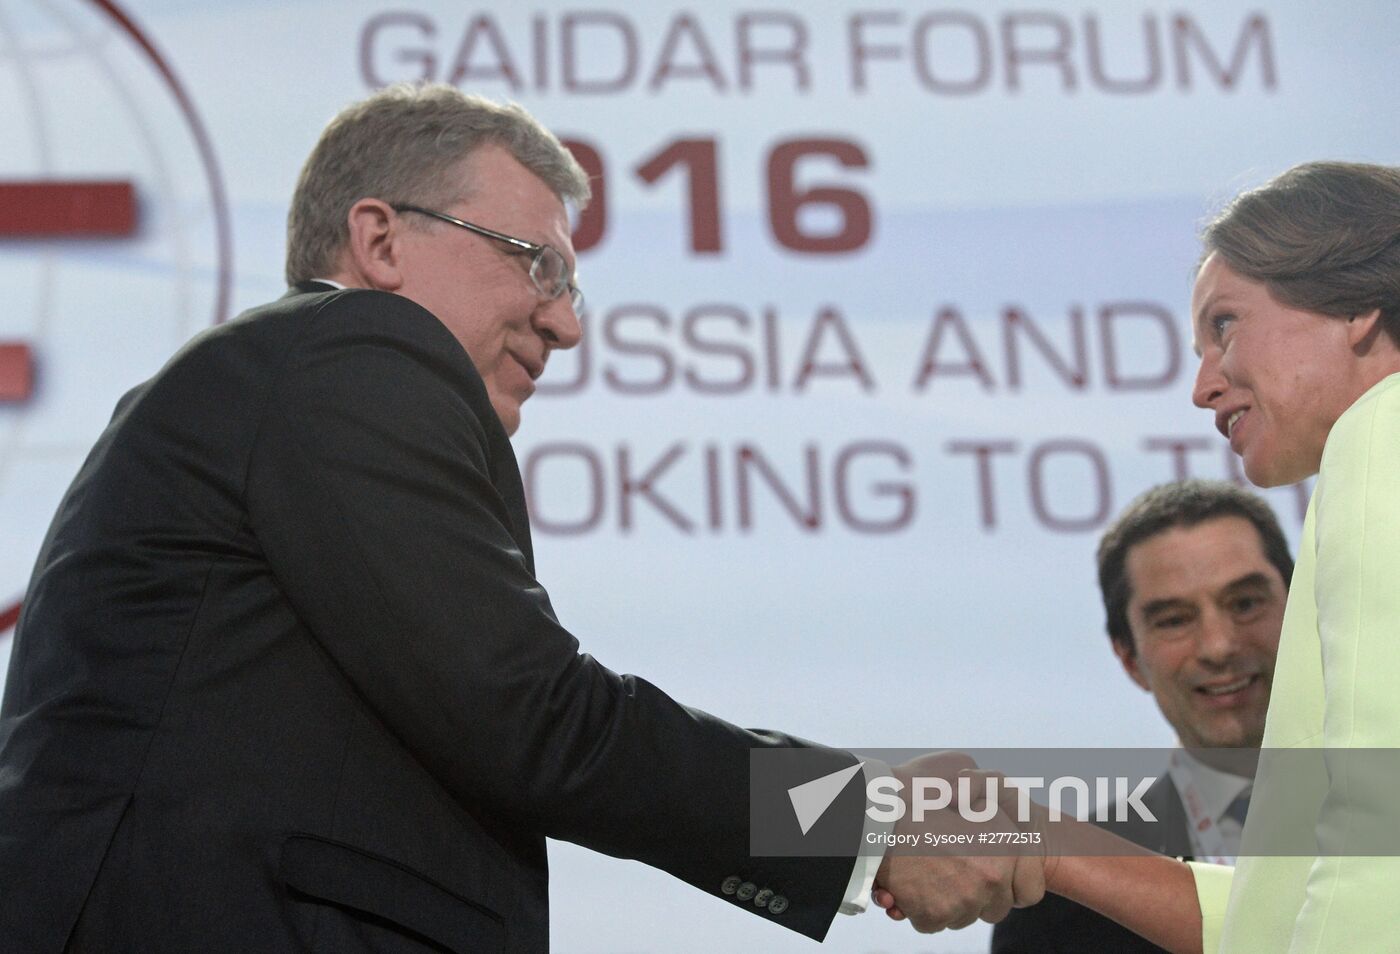 Gaidar Forum 2016 "Russia and the World: Looking to the Future." Day One